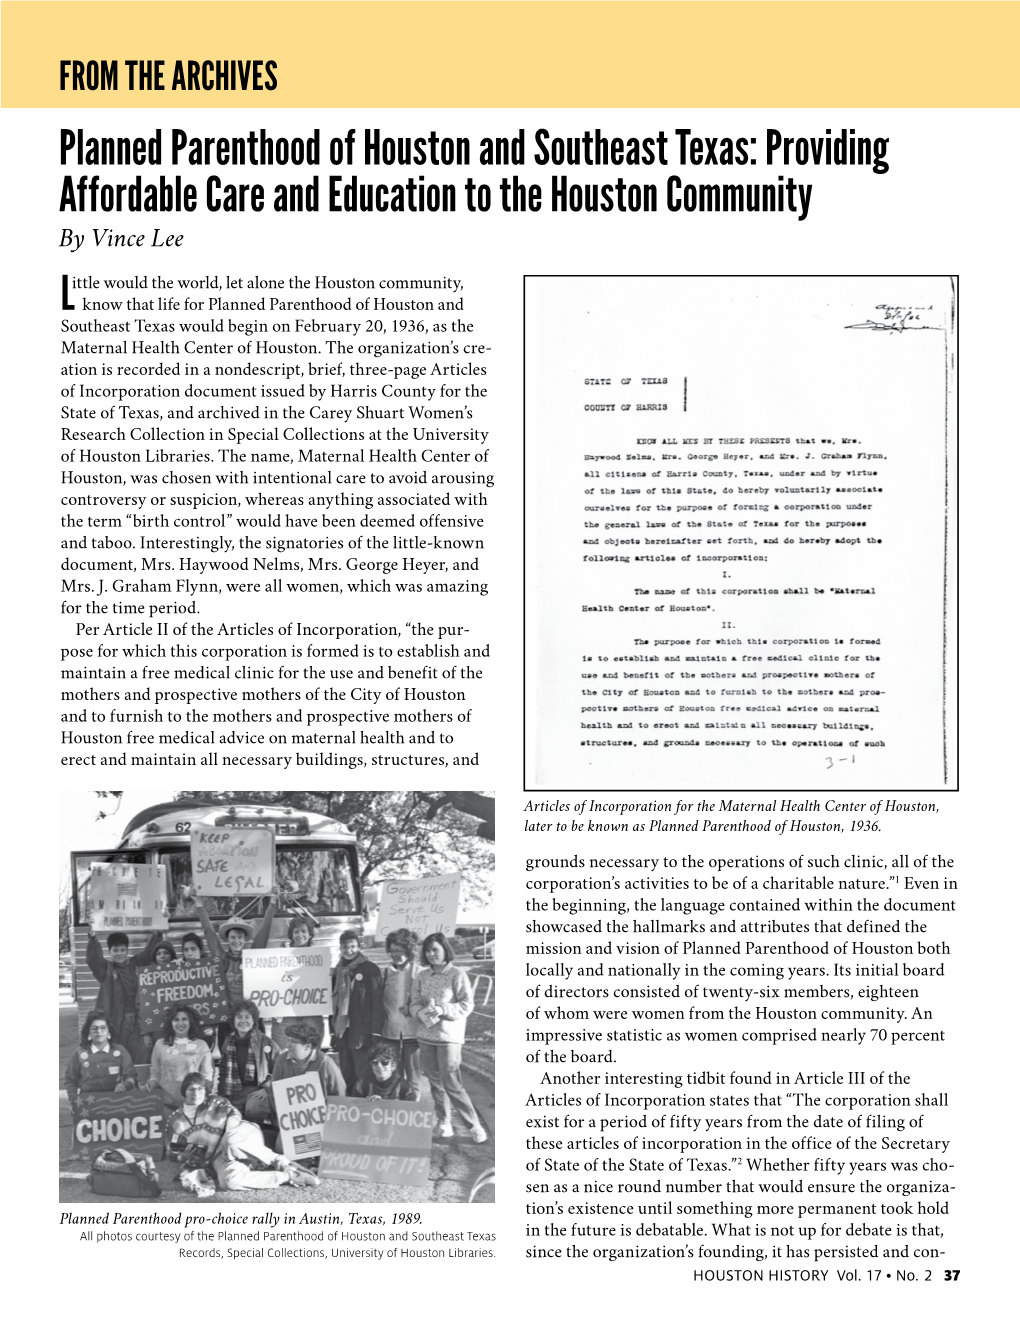 Planned Parenthood of Houston and Southeast Texas: Providing Affordable Care and Education to the Houston Community by Vince Lee